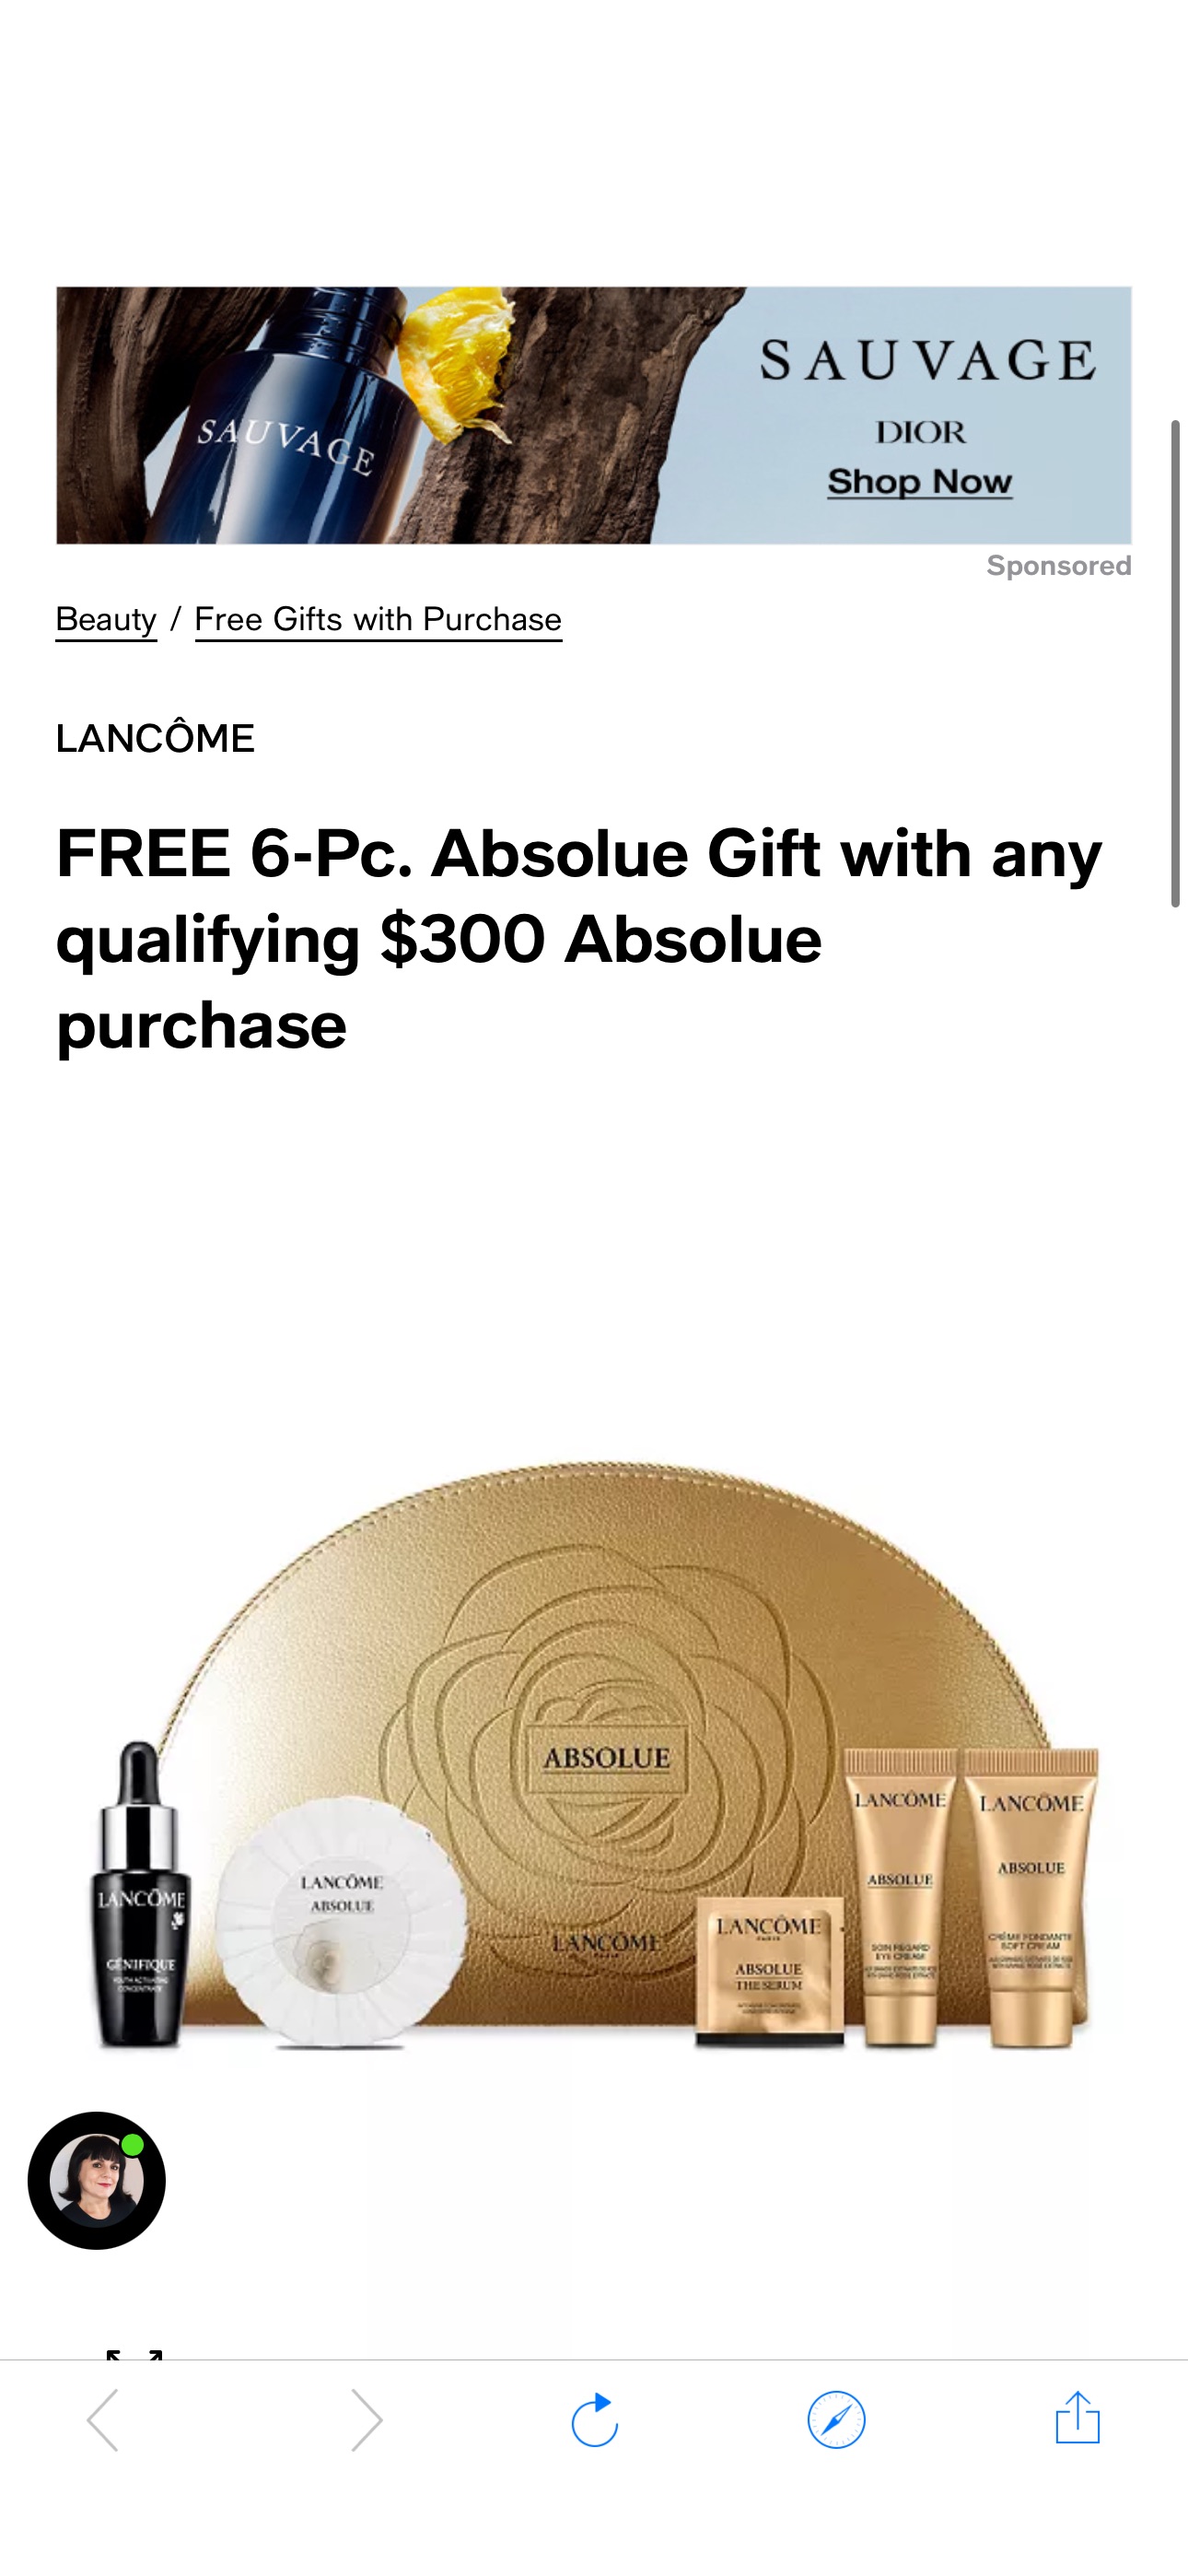 Lancôme FREE 6-Pc. Absolue Gift with any qualifying $300 Absolue purchase - Macy's满额送